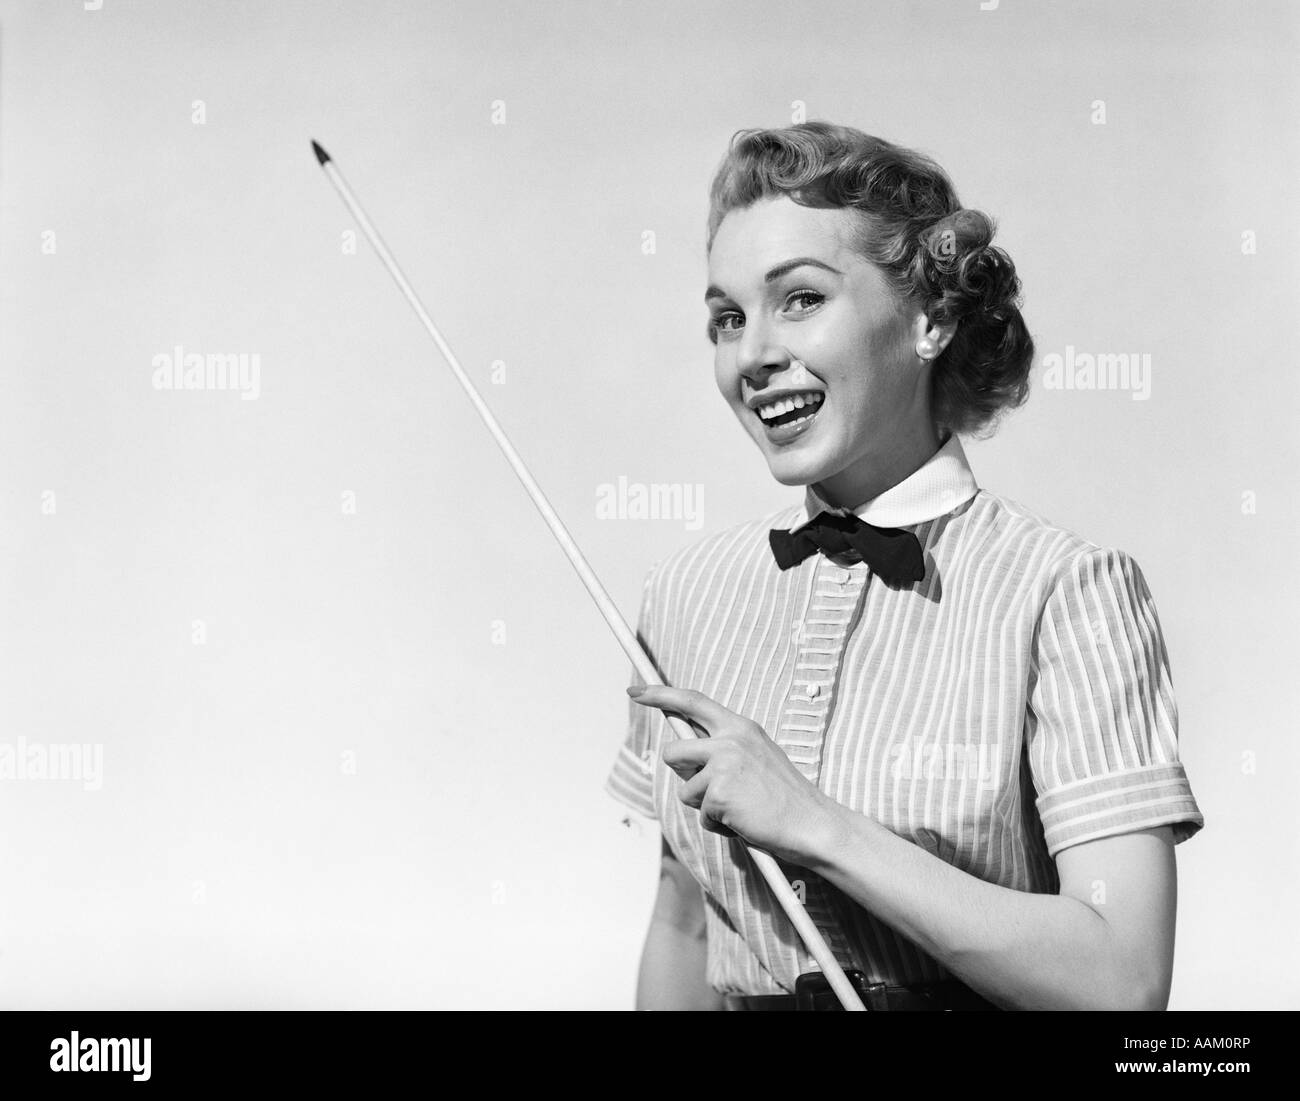 1950s PORTRAIT WOMAN SMILING HOLDING POINTER LOOKING AT CAMERA Stock Photo